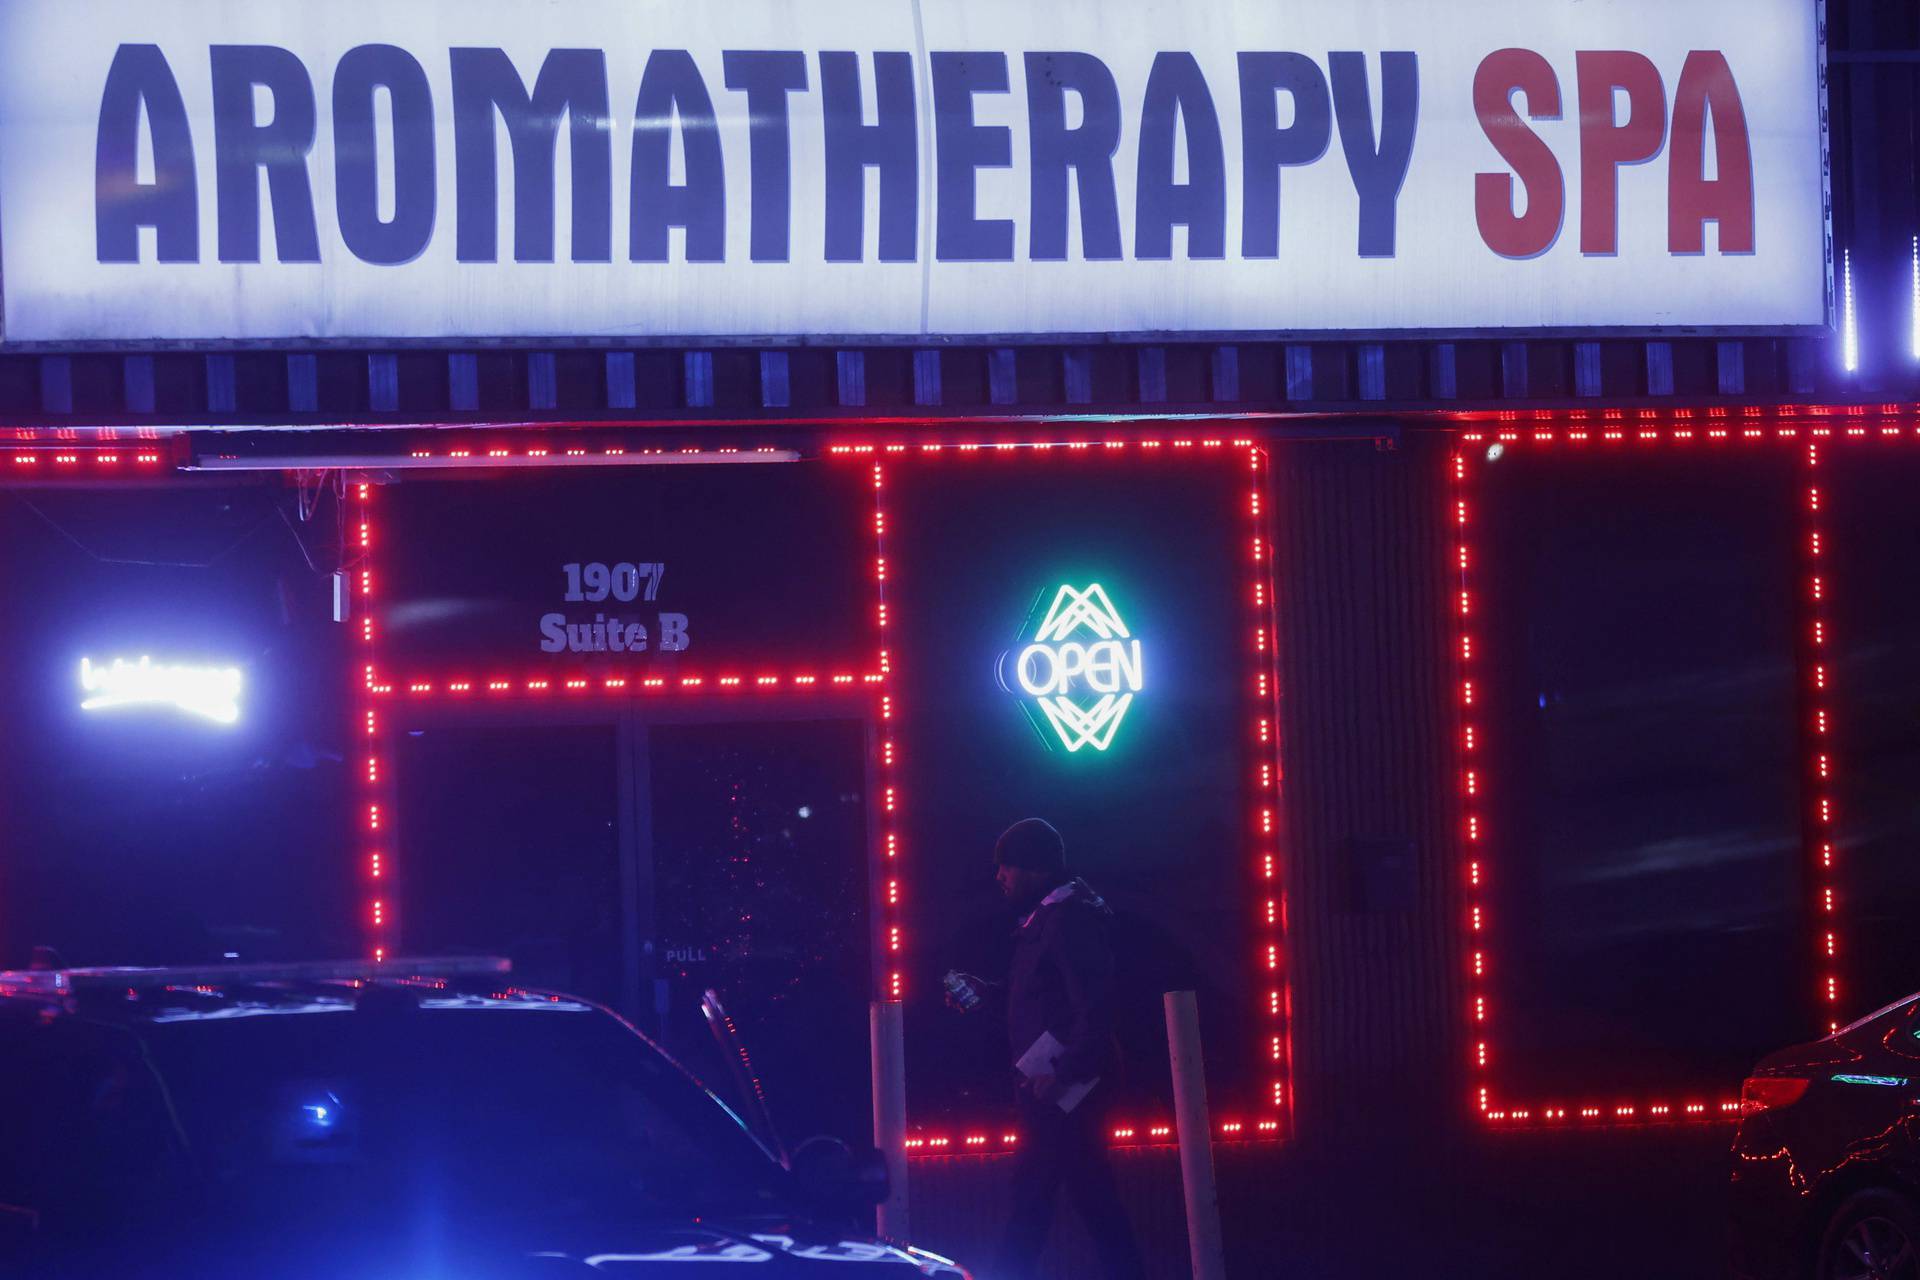 People working at the crime scene enter Aromatherapy Spa after deadly shootings at spas in Atlanta